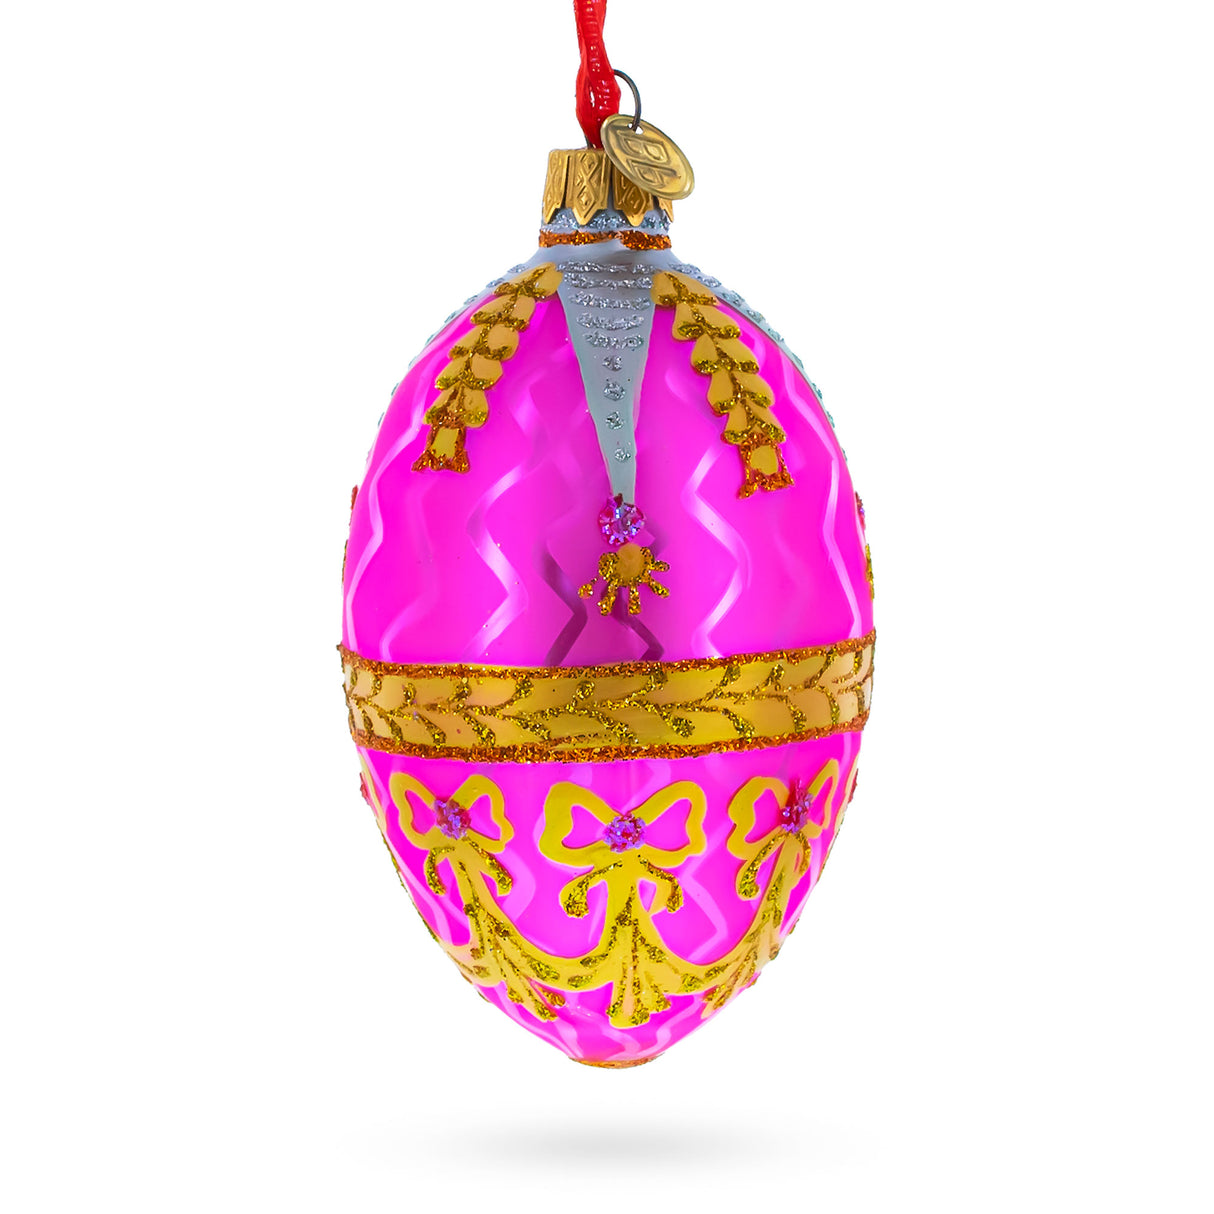 Golden Garlands On Pink Egg Glass Ornament 4 Inches in Pink color, Oval shape